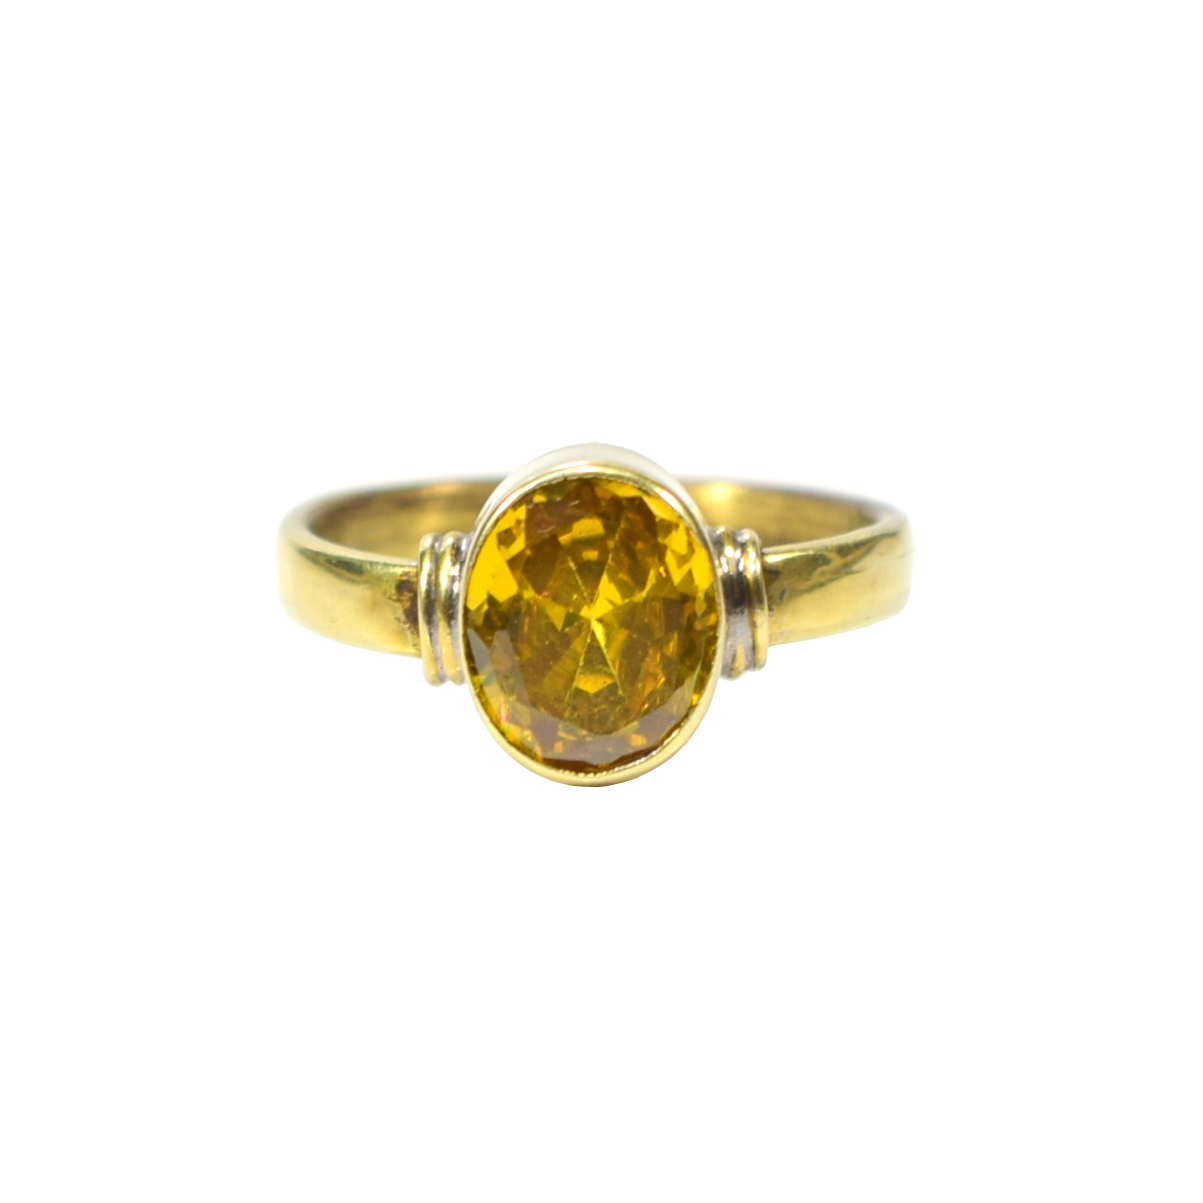 4.40 Carat Yellow Beryl and .10 ct. t.w. White Zircon Ring in 14kt Yellow  Gold | Ross-Simons